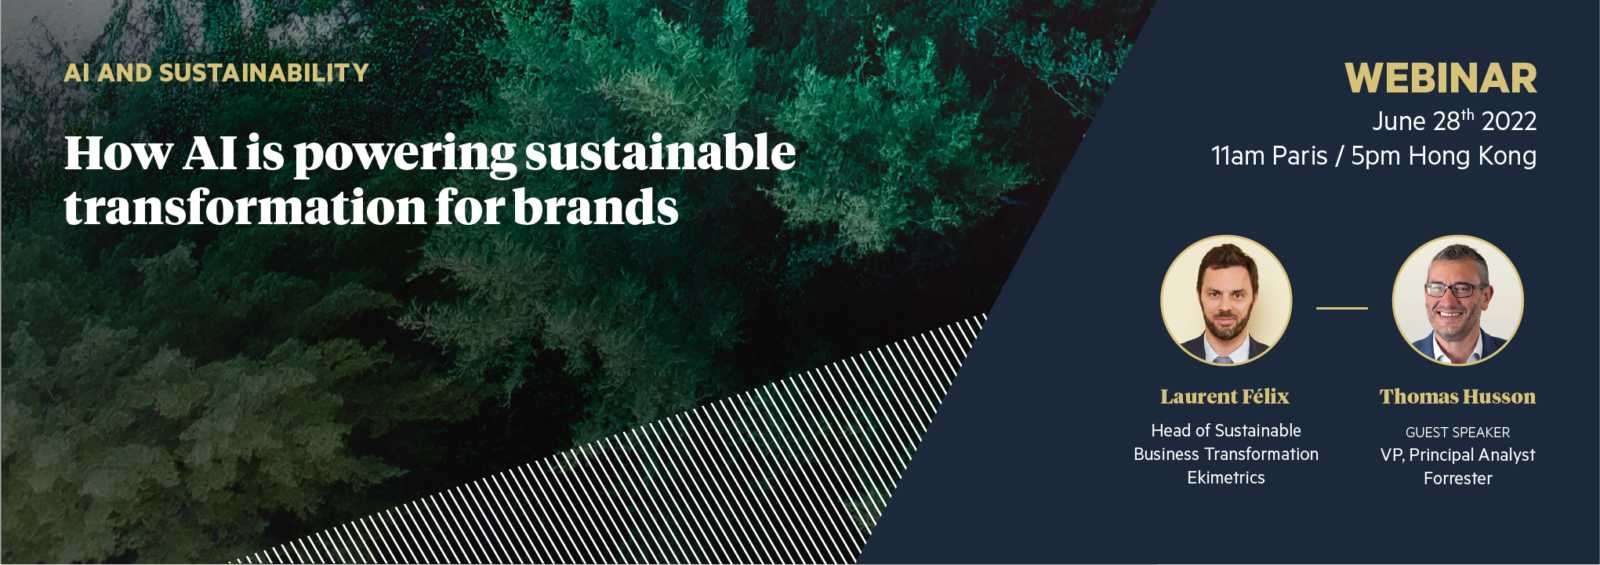 How AI is powering sustainable transformation for brands